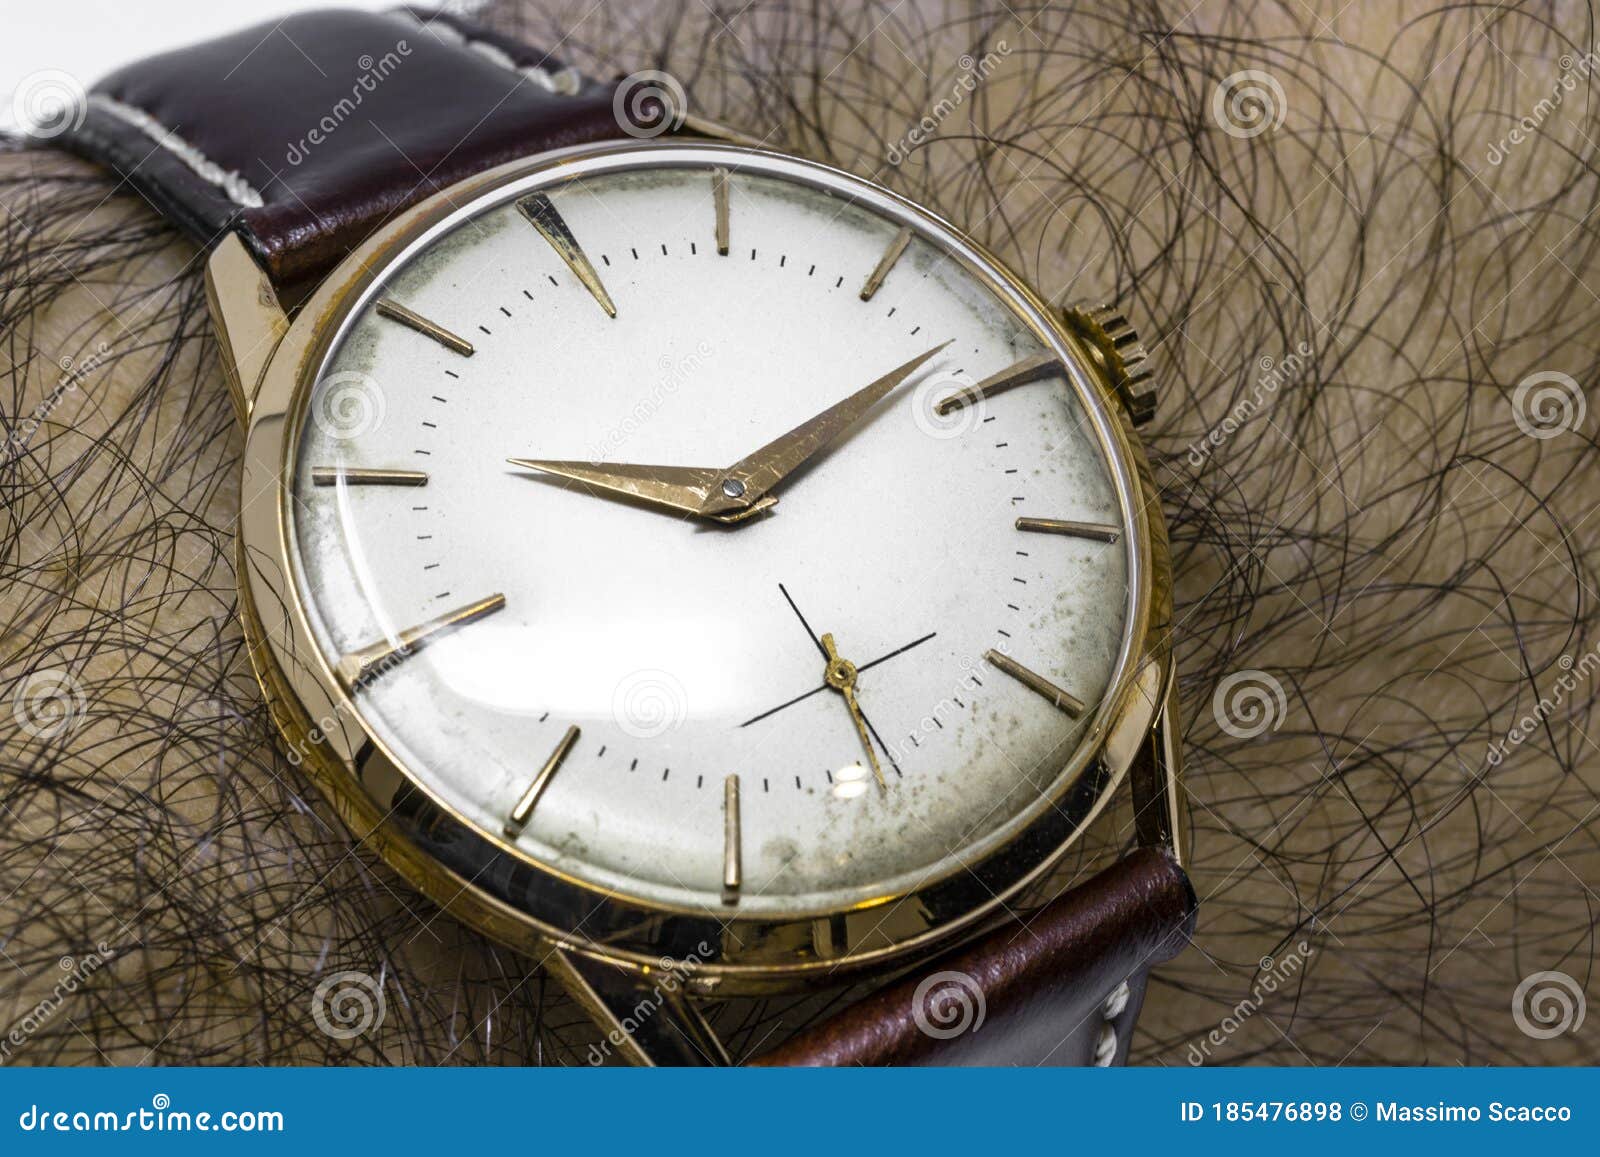 Gold Mechanical Wristwatch with Manual Winding Stock Photo - Image of ...